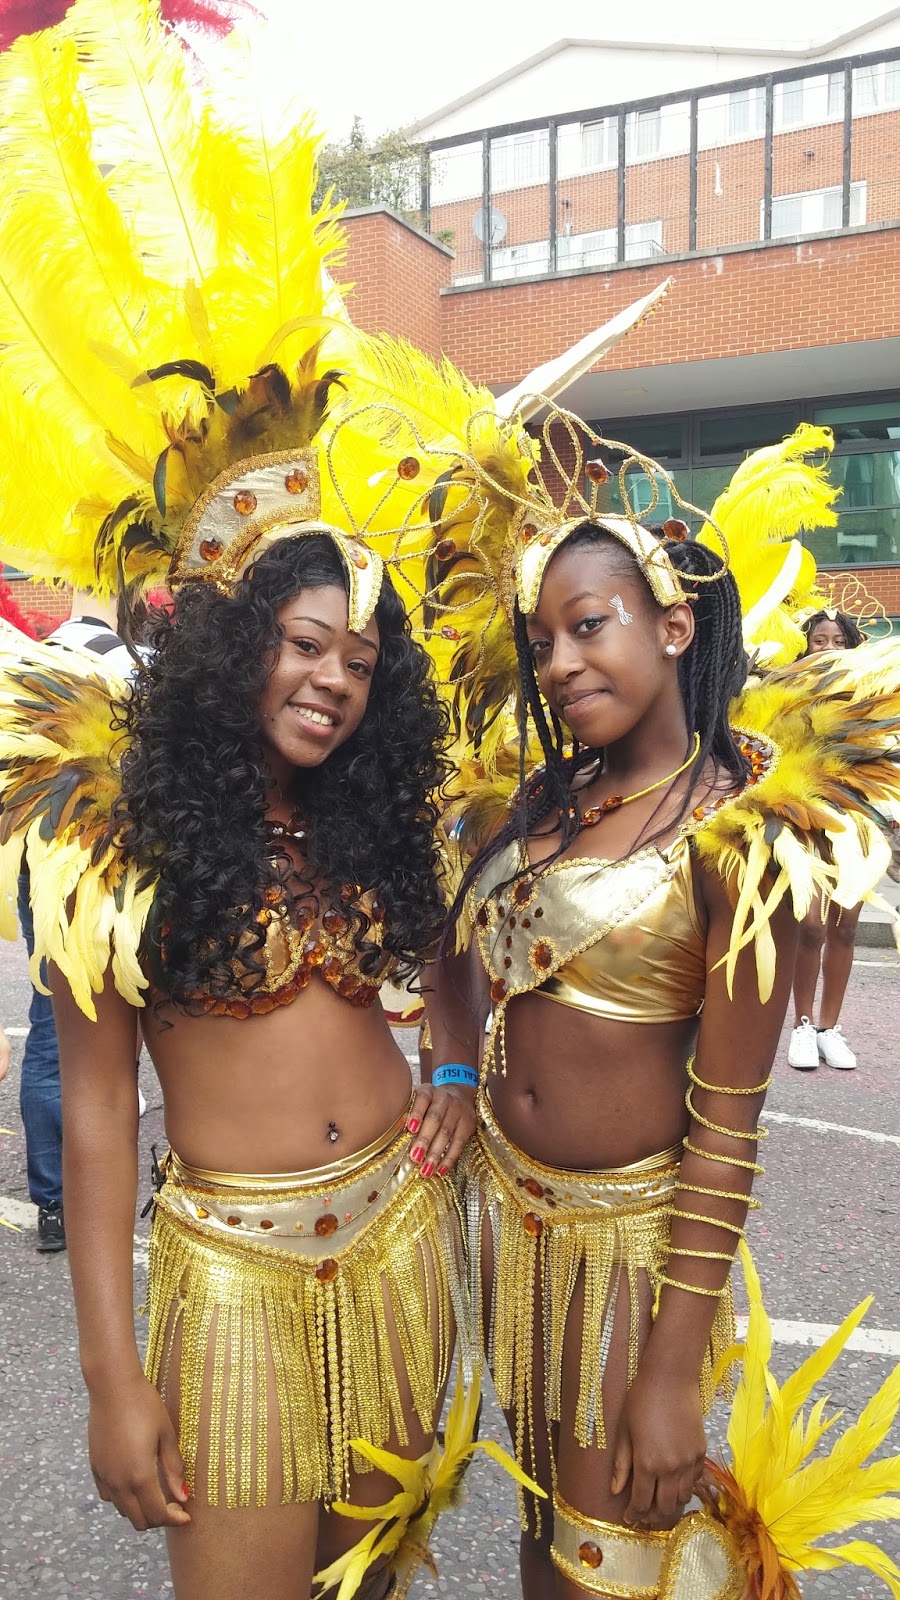 Notting Hill Carnival costumes